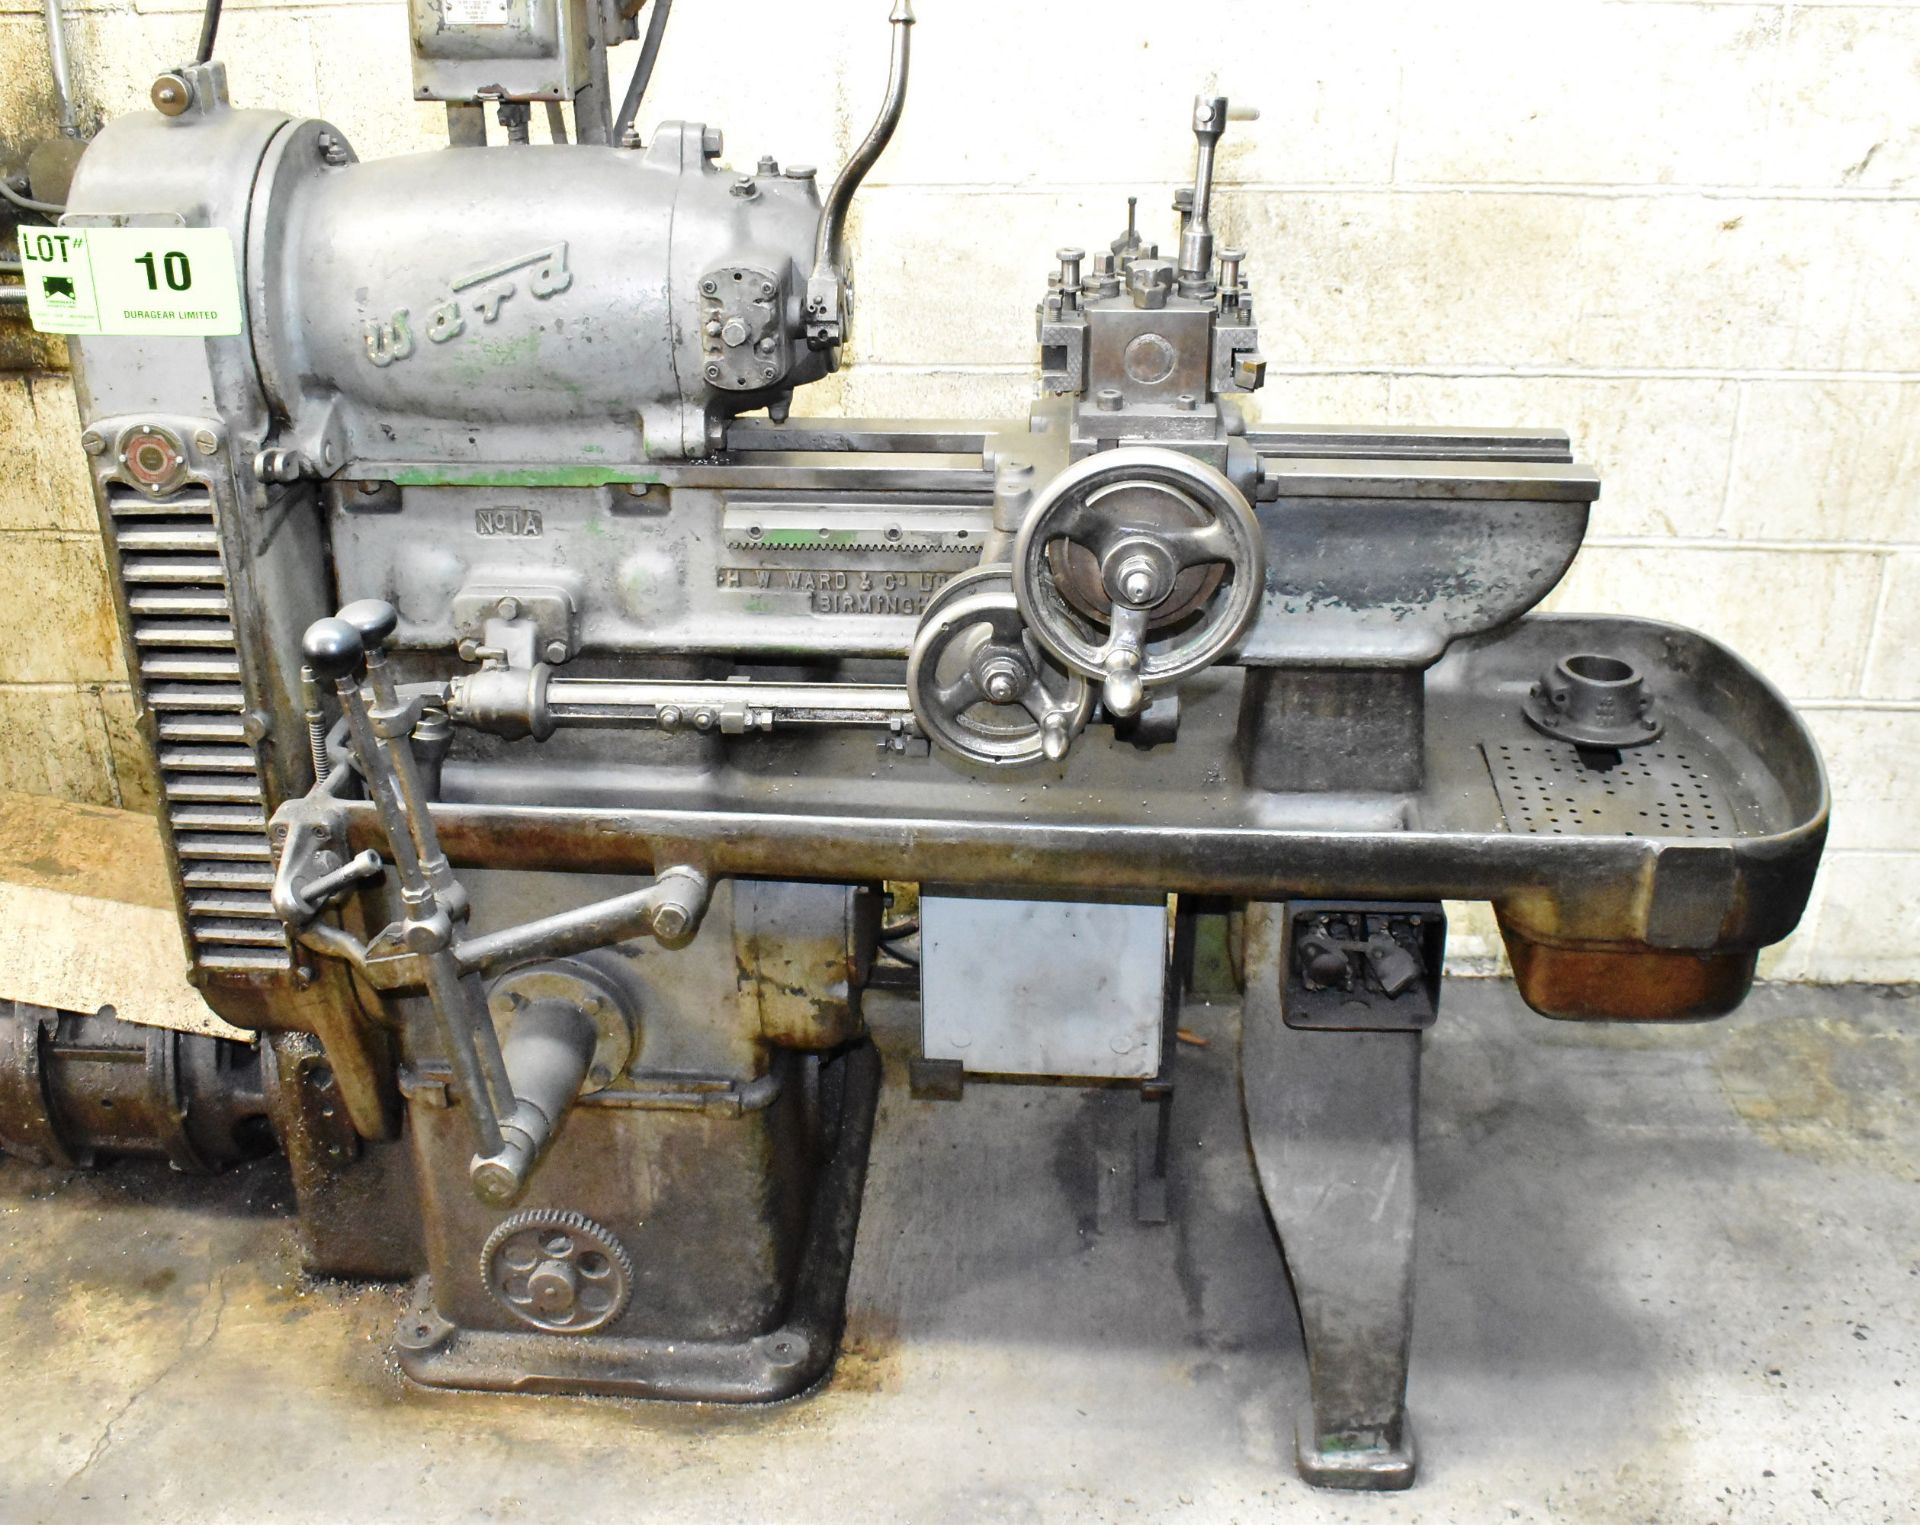 H.W. WARD NO.1A CHUCKING LATHE WITH, 10" SWING OVER BED, 1" BAR CAPACITY, 3" COLLET CHUCK, S/N N/